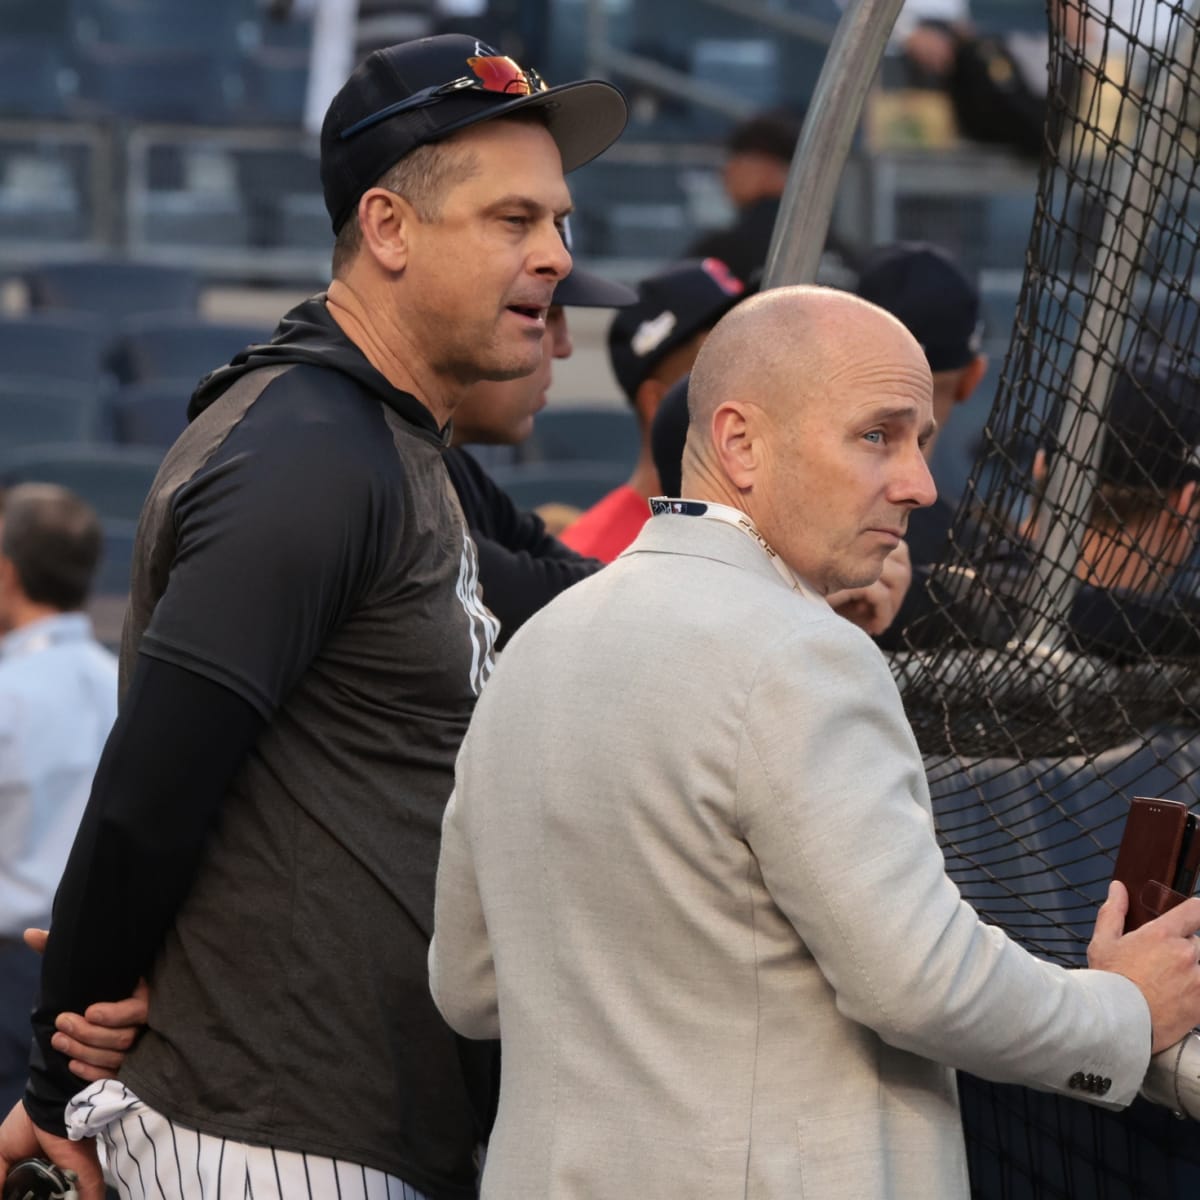 Why did the Yankees keep Aaron Boone? Brian Cashman says Boone is 'No. 1  managerial candidate in baseball